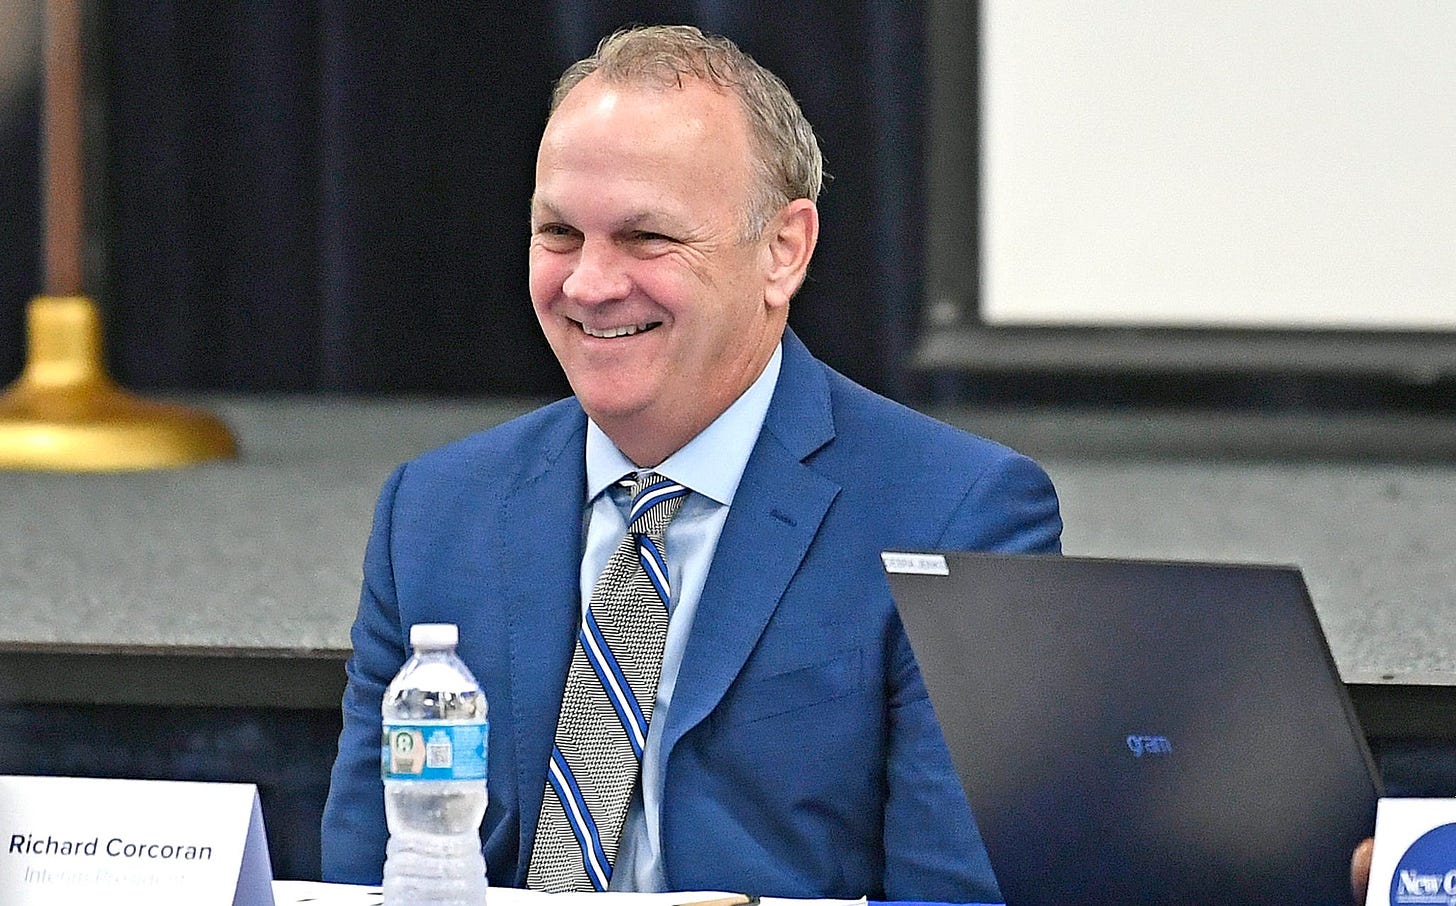 New College board chooses Richard Corcoran as permanent president